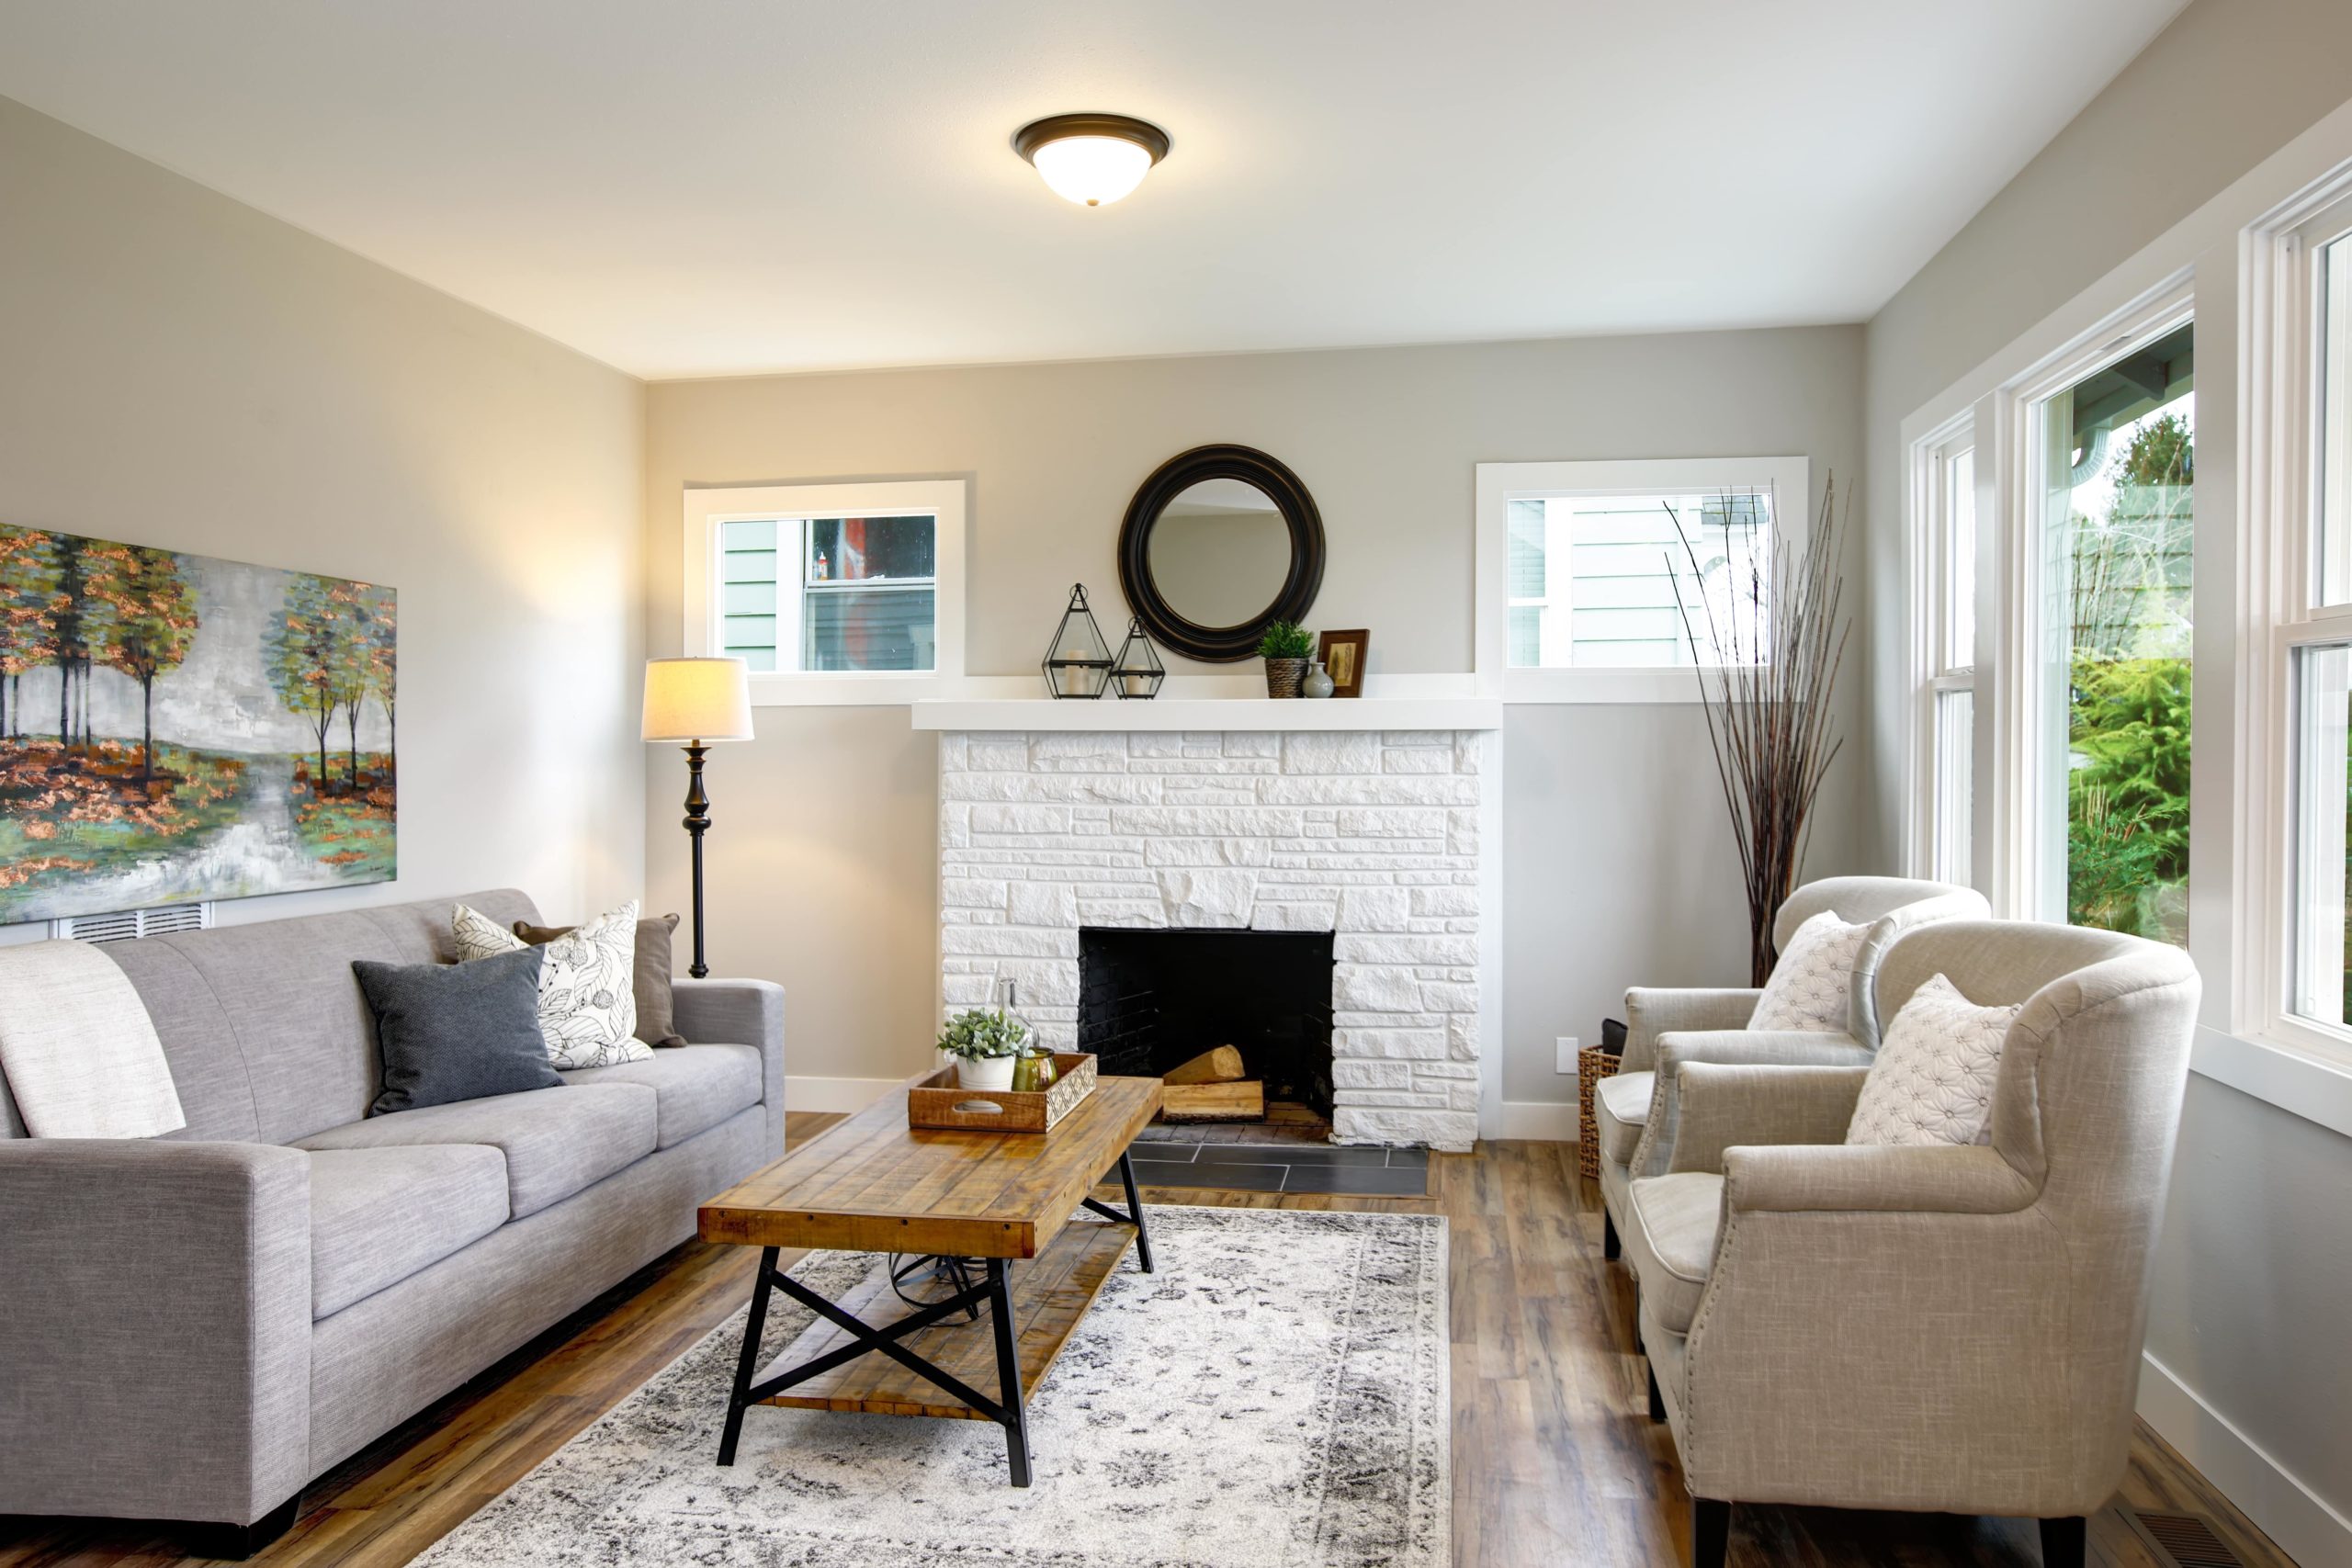 A beautiful white living room with rustic accents, complete with white stone fireplace